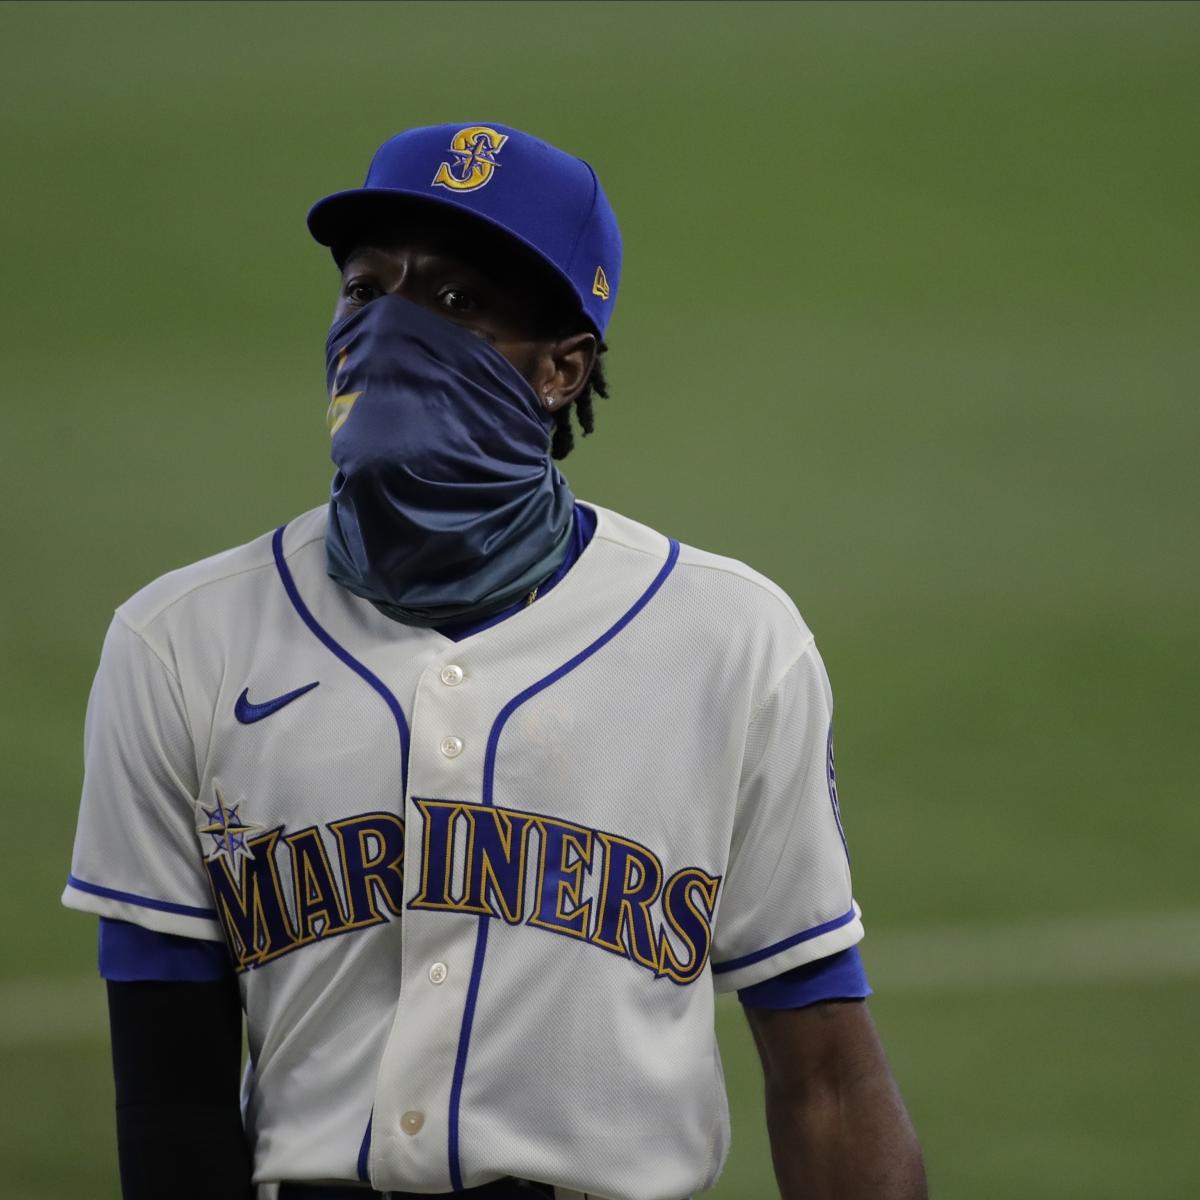 Dee Strange-Gordon is the Seattle Mariners Nominee for 2020